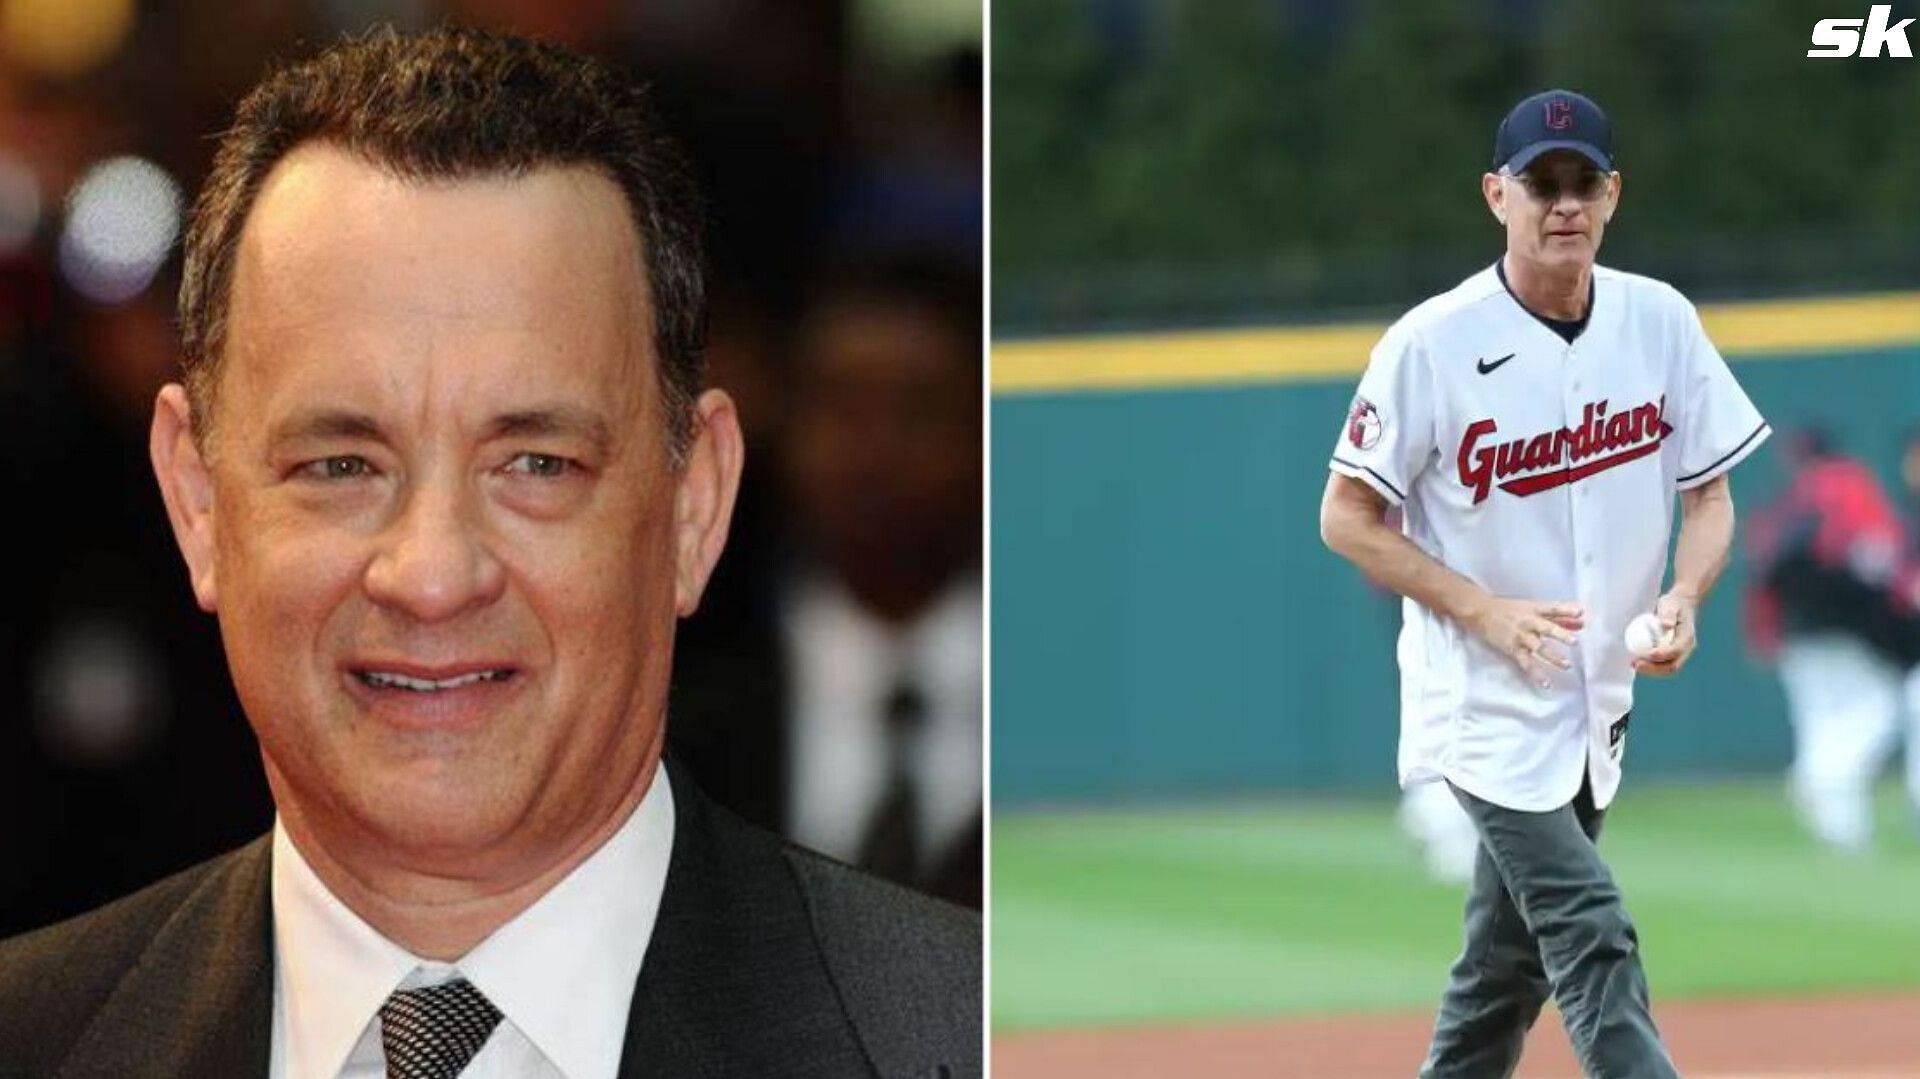 "There's no crying in baseball"- When Tom Hanks channeled his inner persona with iconic film dialogue to spread a message of resilience during COVID